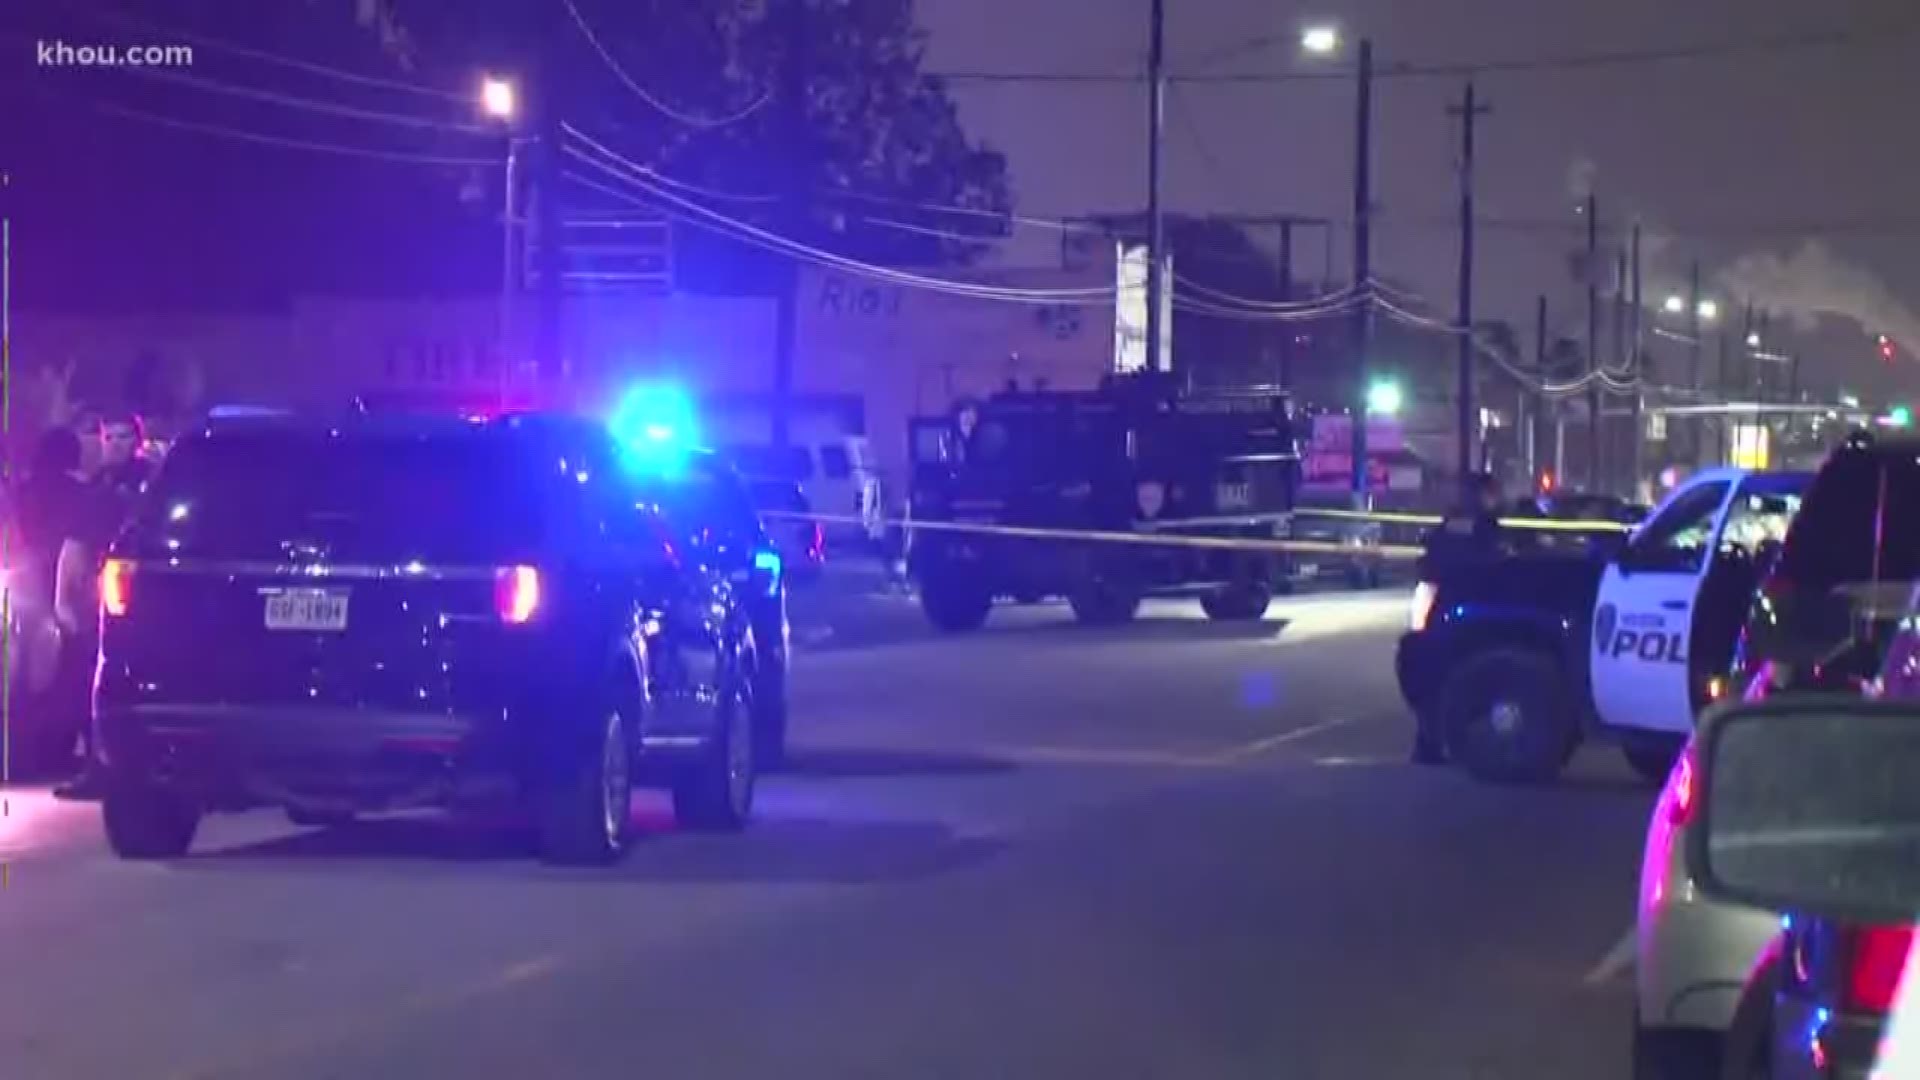 Police say an armed suspect was shot and killed by an officer during an undercover drug bust Wednesday night in the Greater East End.